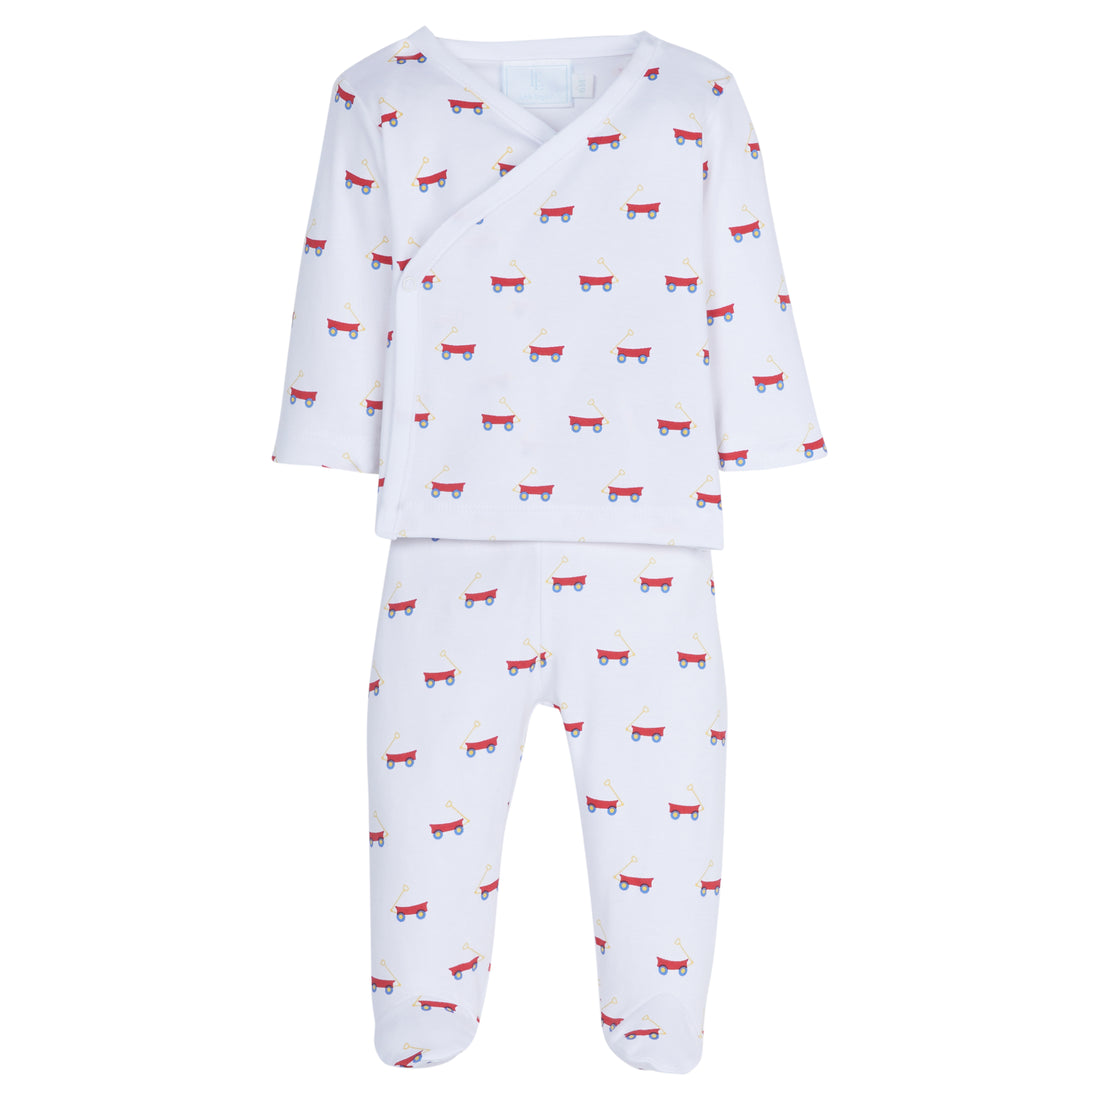 Little English, baby boys  pima knit set, long-sleeve wrap top with footed bottoms, white with red wagons